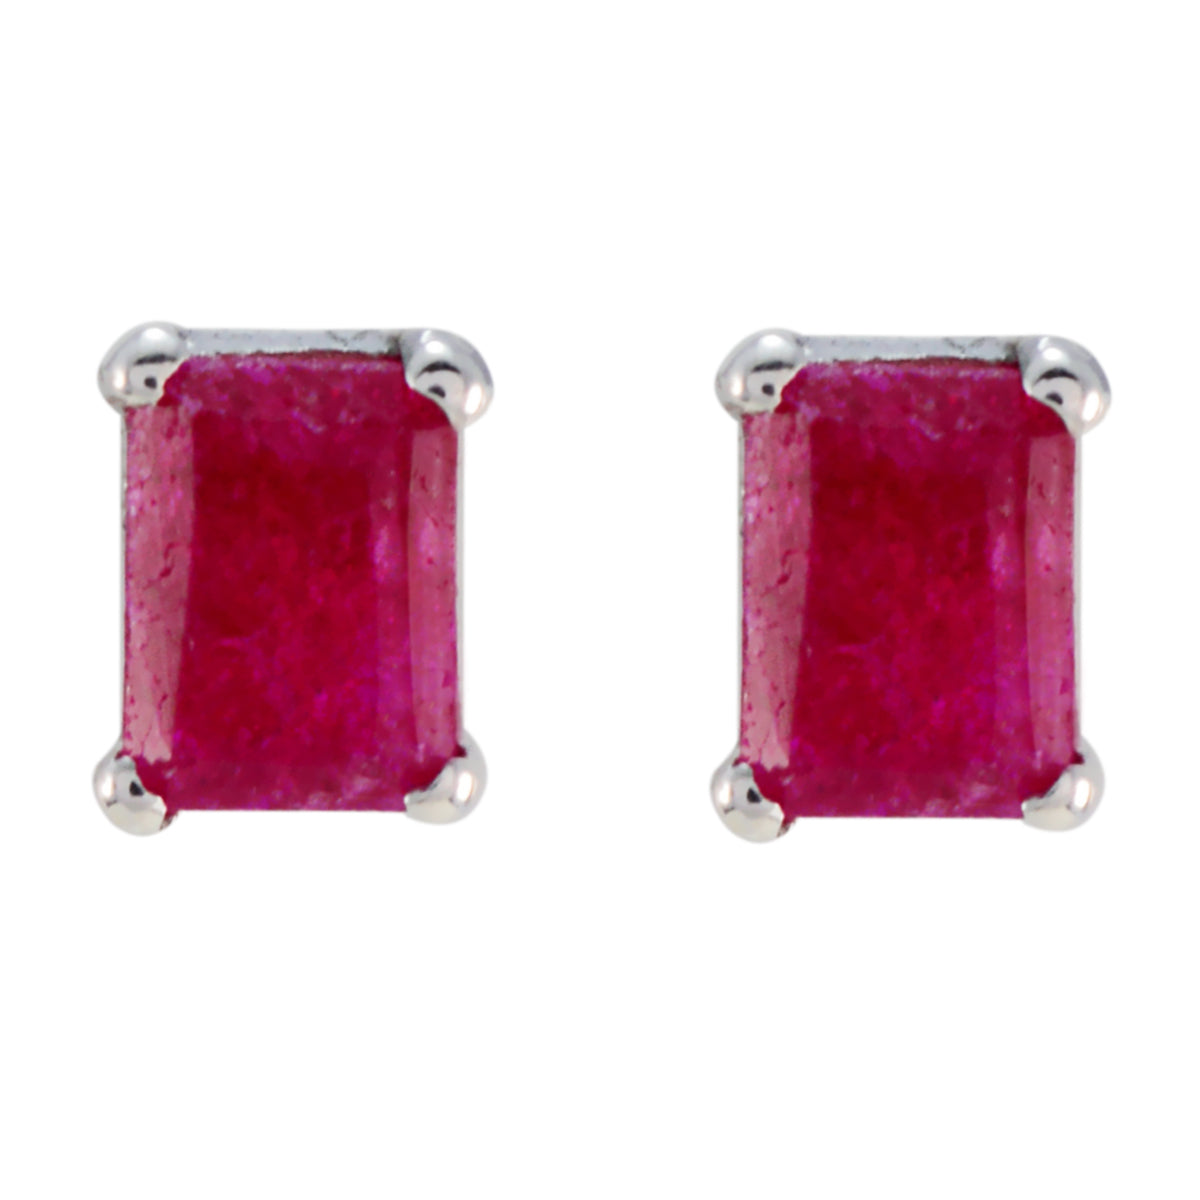 Riyo Genuine Gems Octogon Faceted Red Indian Ruby Silver Earrings gift